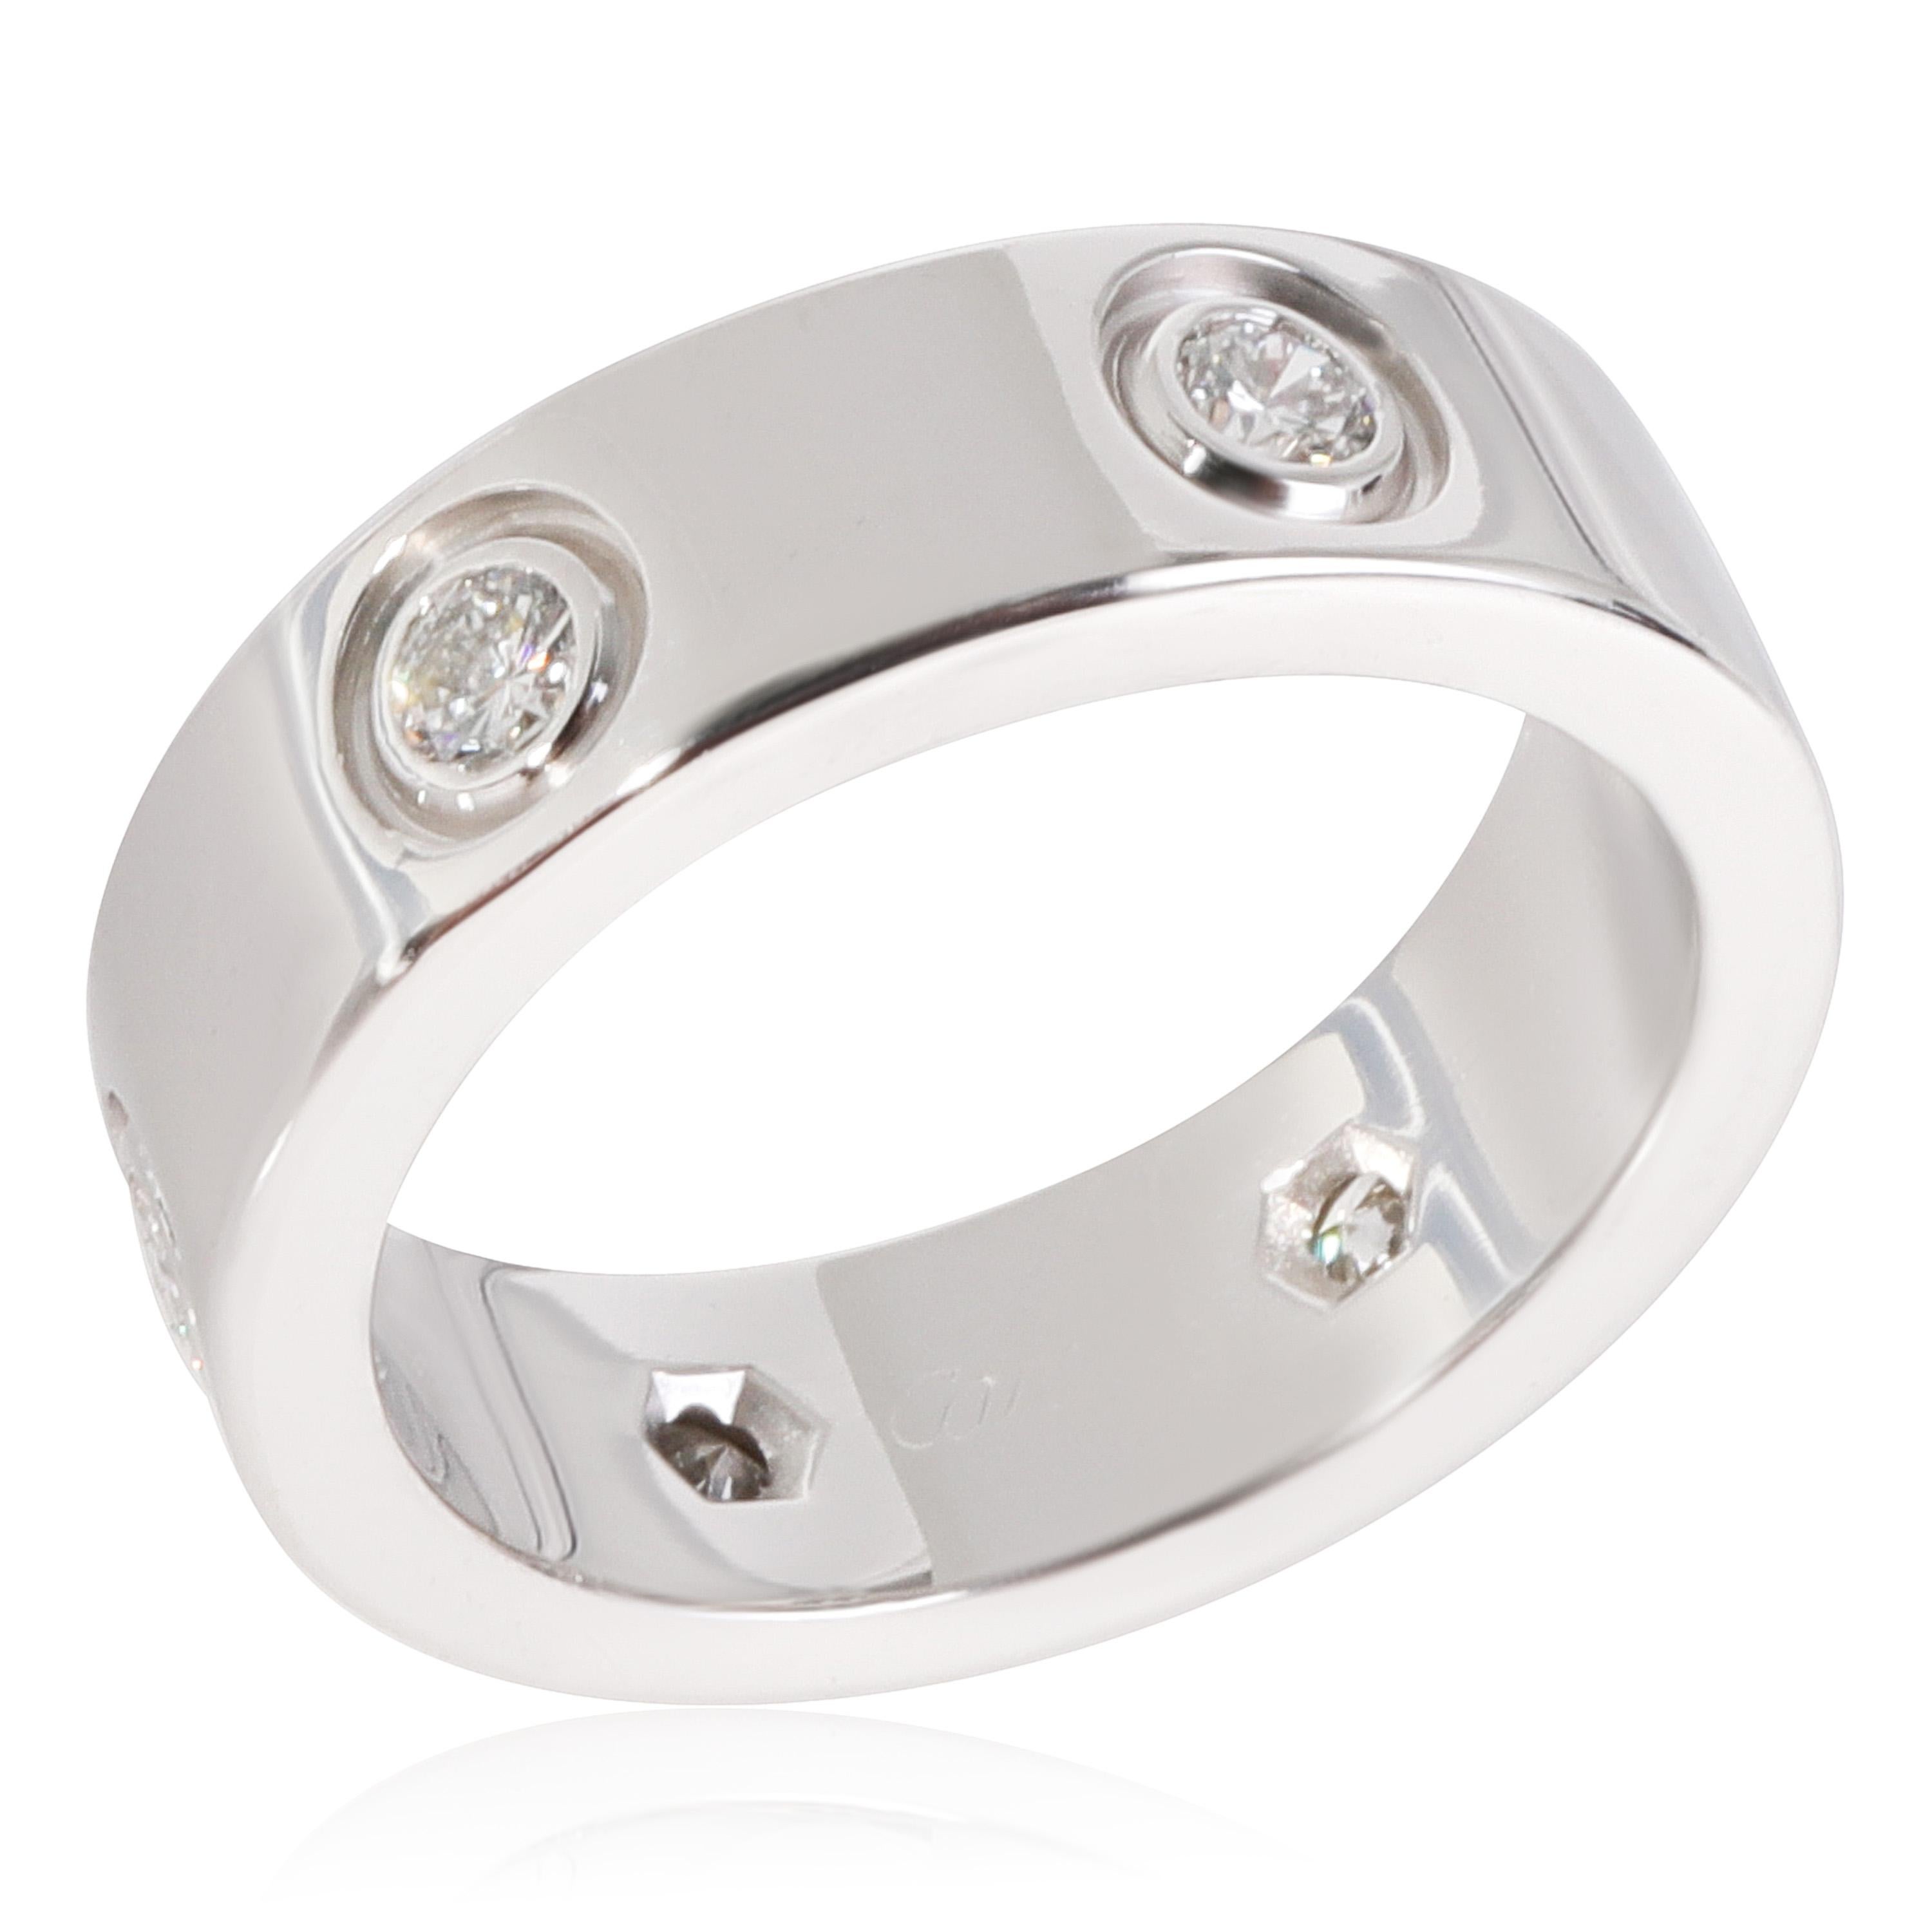 Cartier Love Diamond Ring in 18k White Gold 0.46 CTW In Excellent Condition For Sale In New York, NY